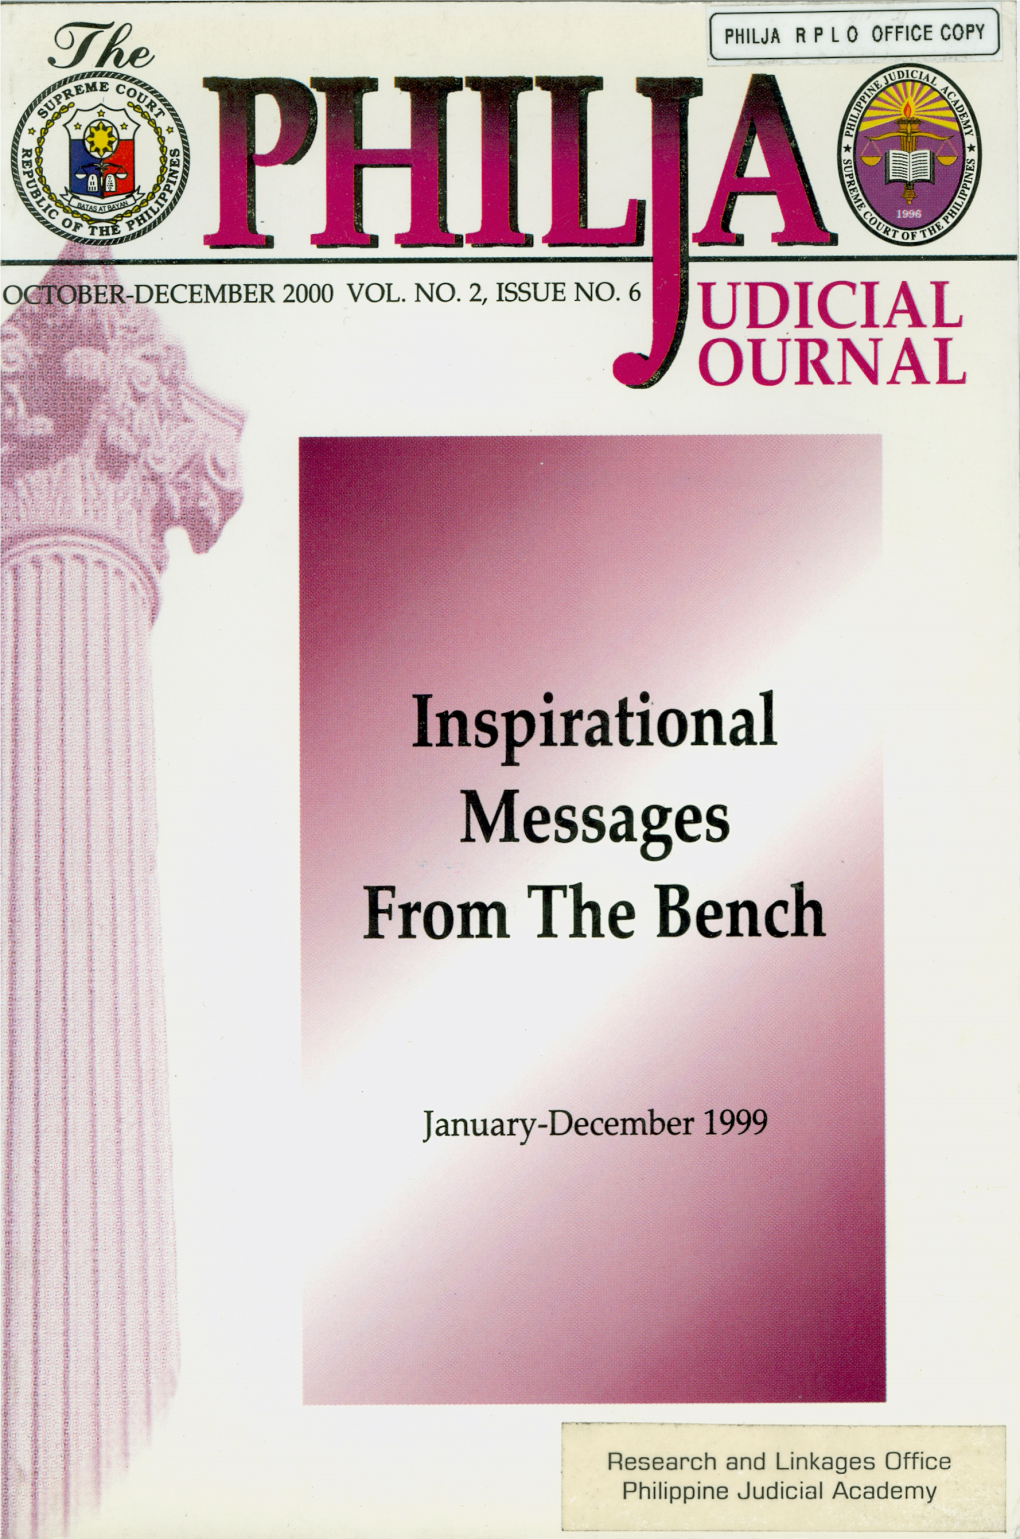 THE PHILJA JUDICIAL JOURNAL Inspirational Messages from the Bench